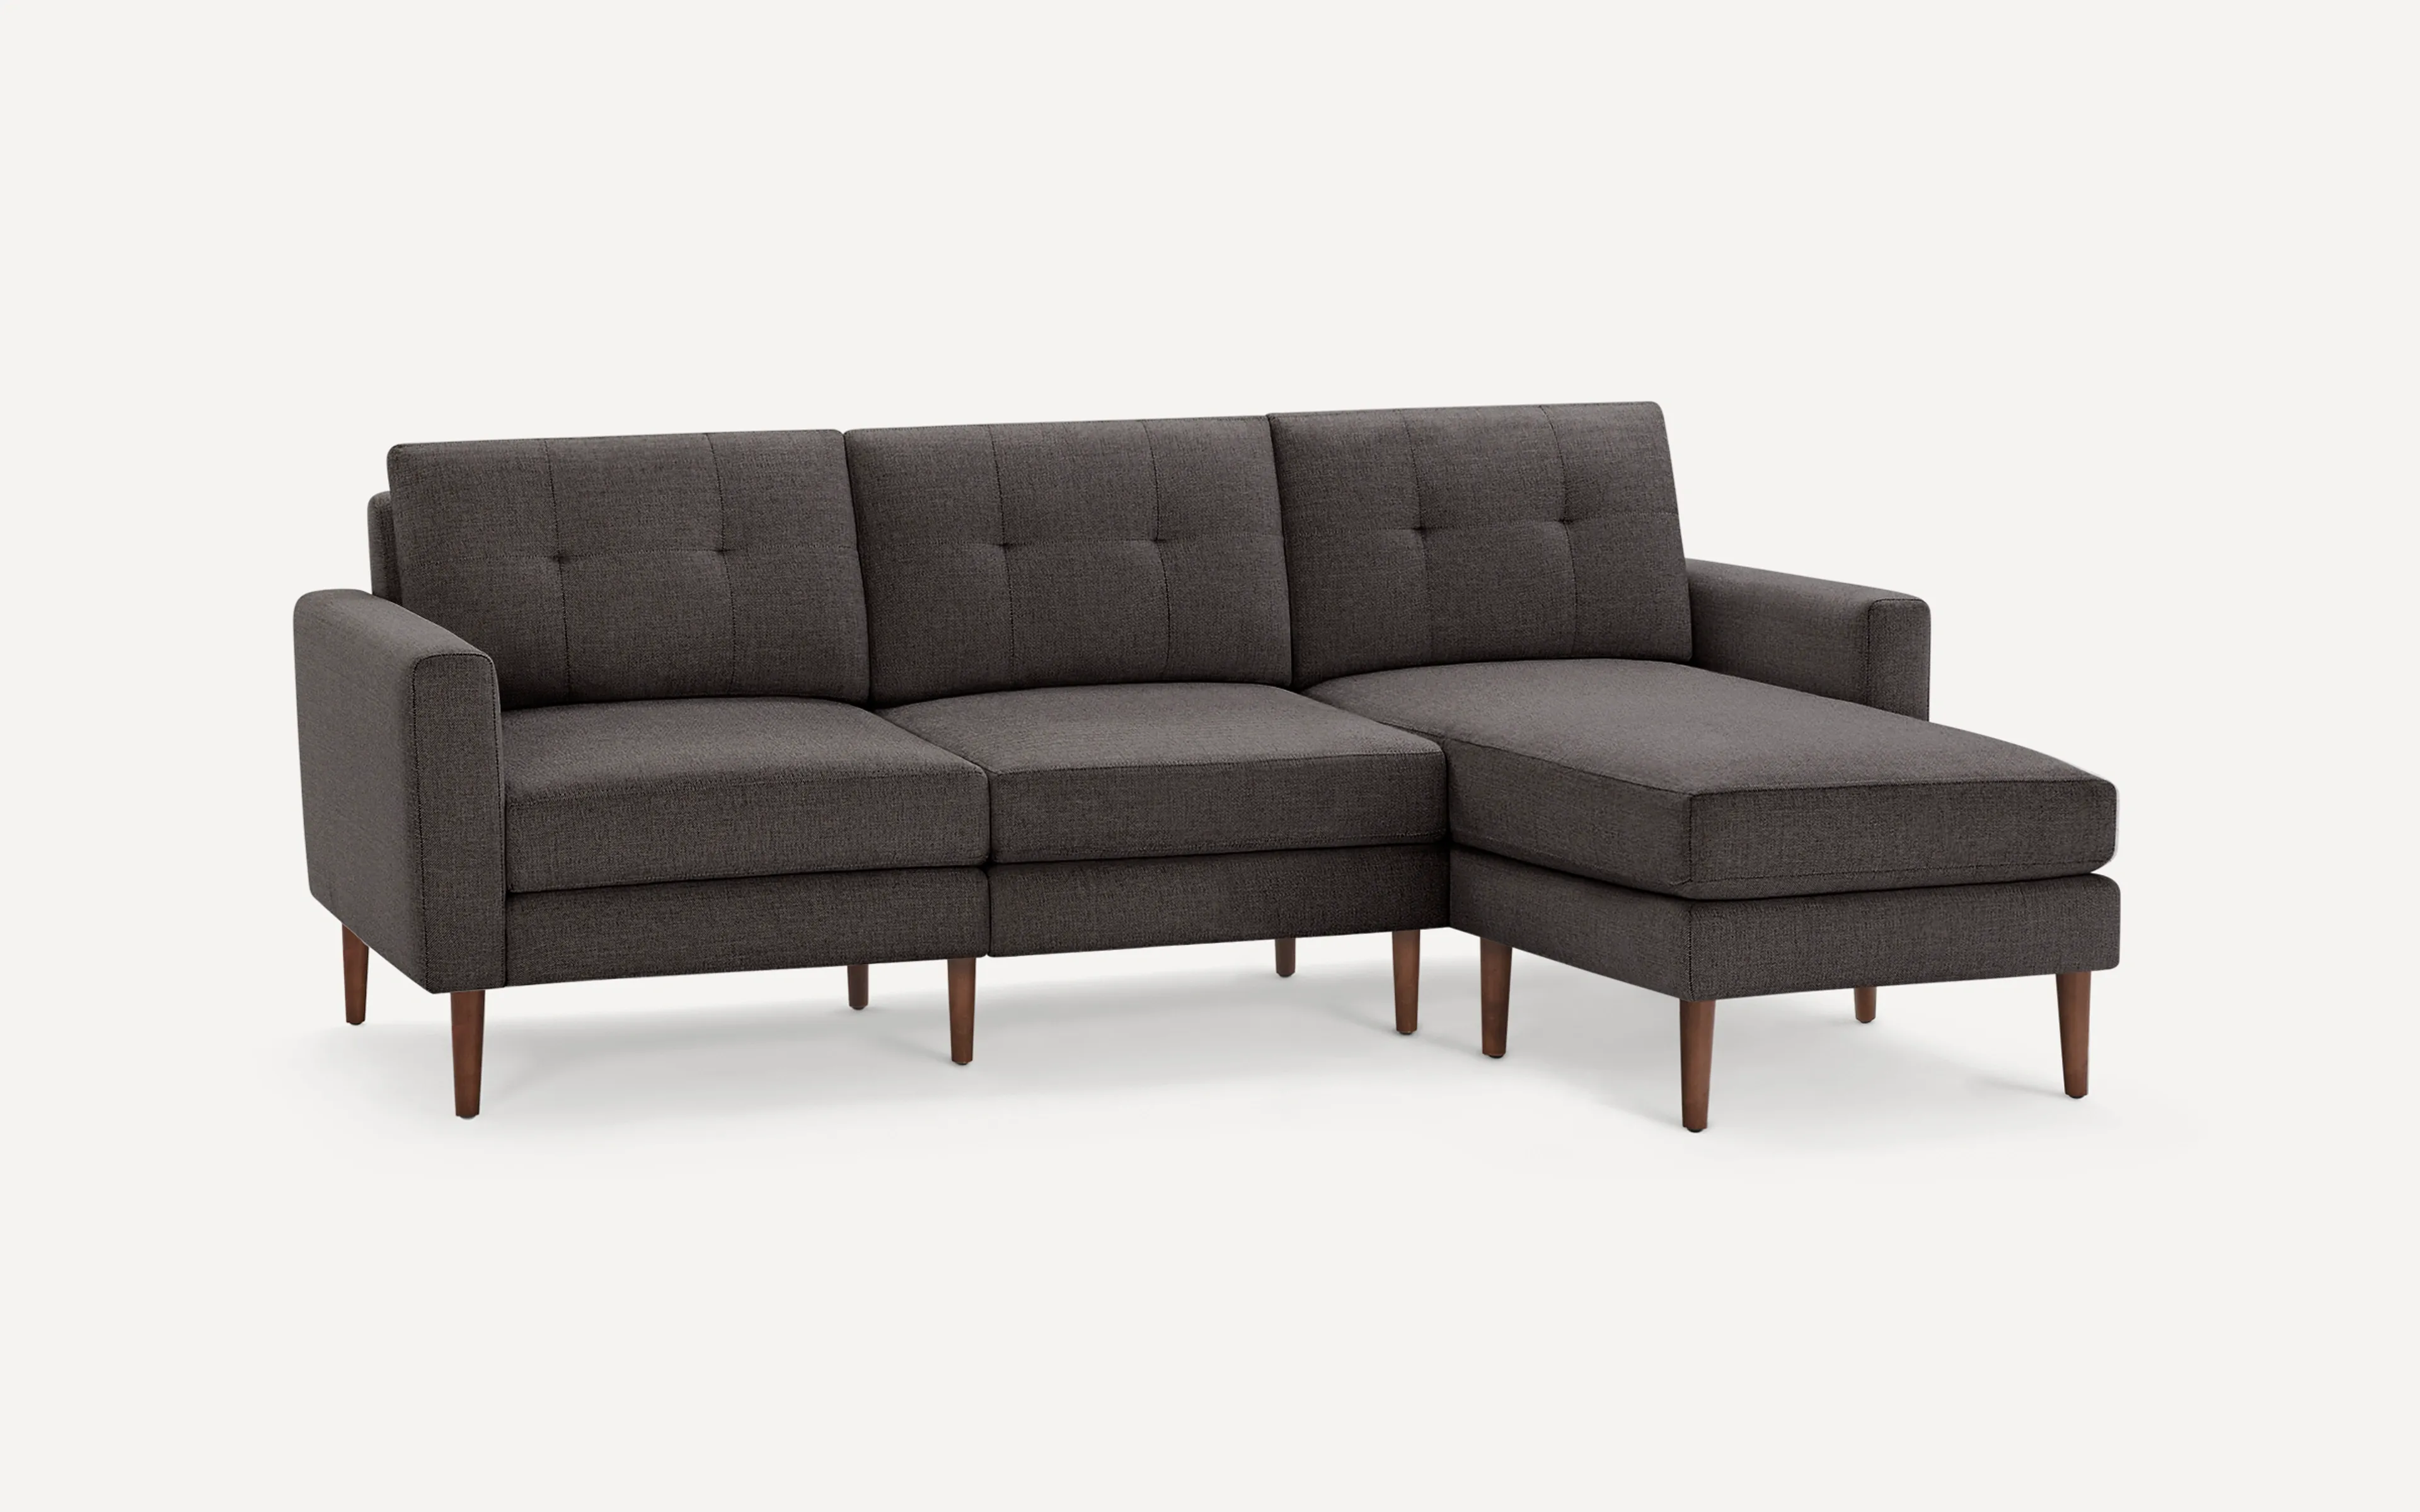 Original Nomad Chaise Sofa in Charcoal Fabric